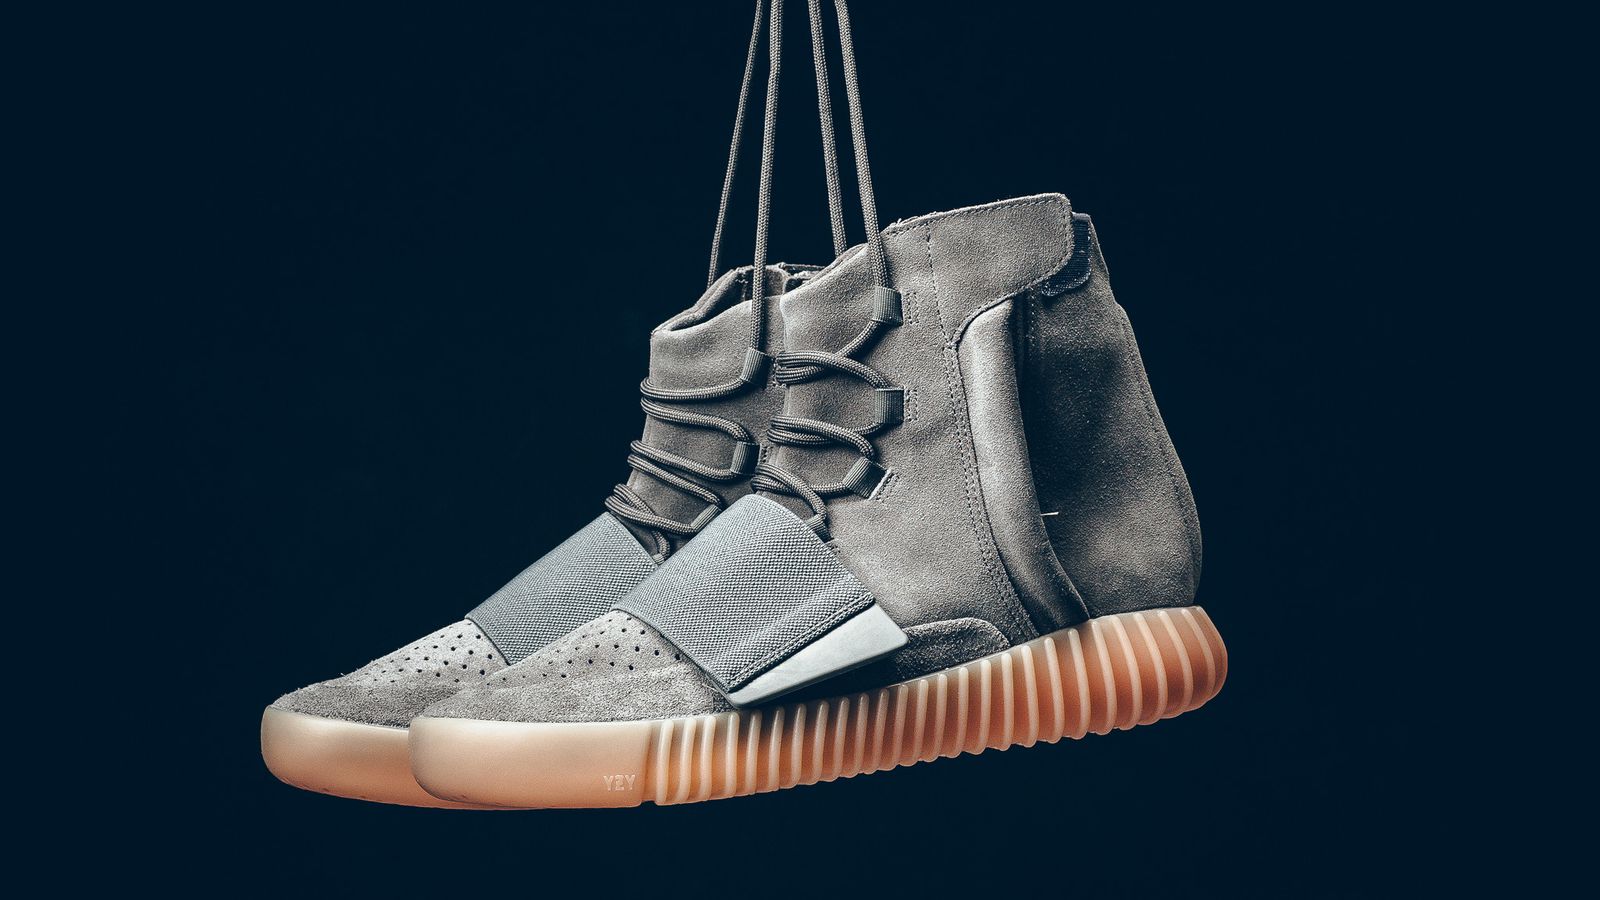 Yeezy Boost 750s Are Basically Impossible to Get But Here